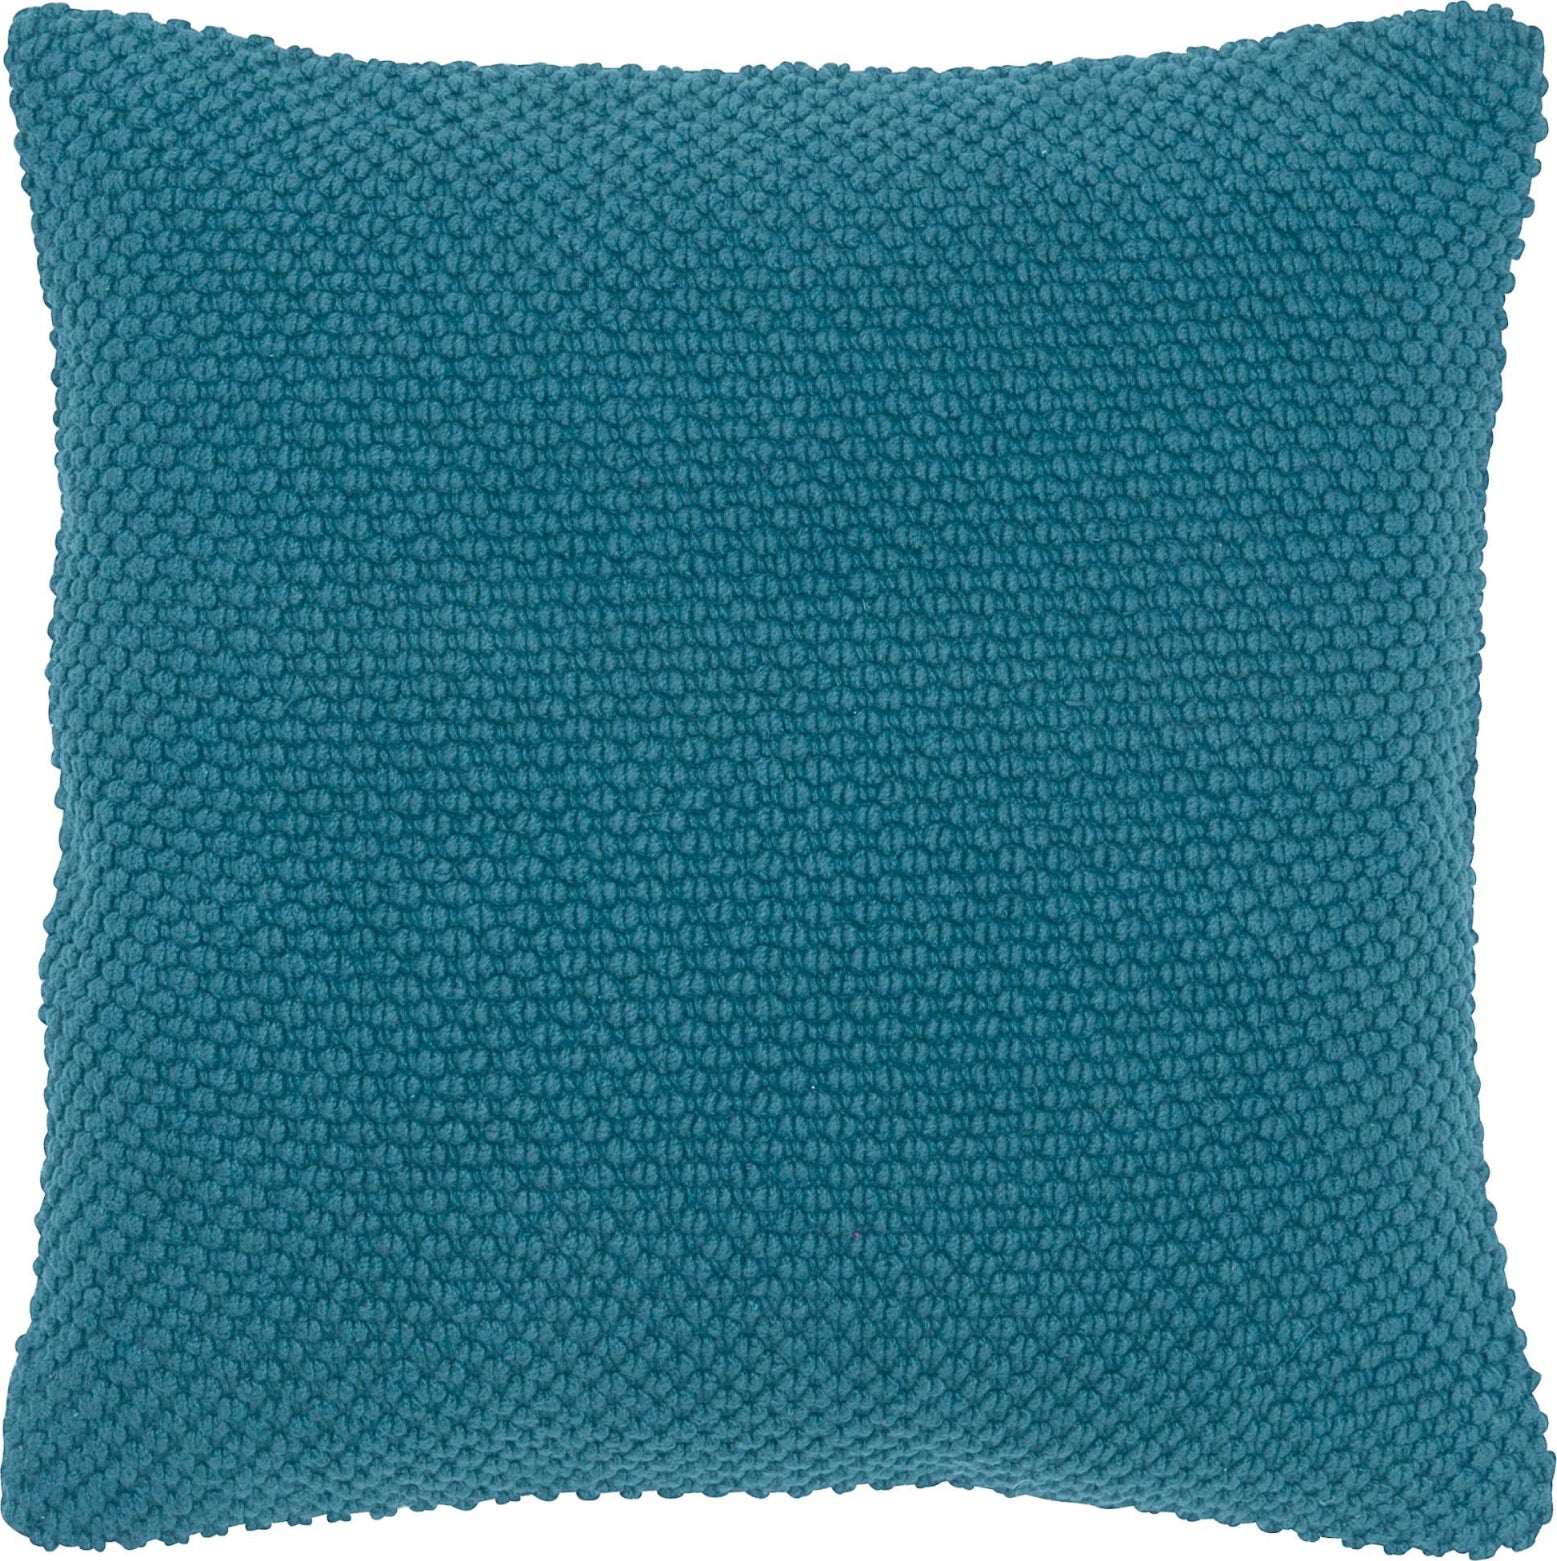 Rizzy Pillows T05287 Peacock Blue